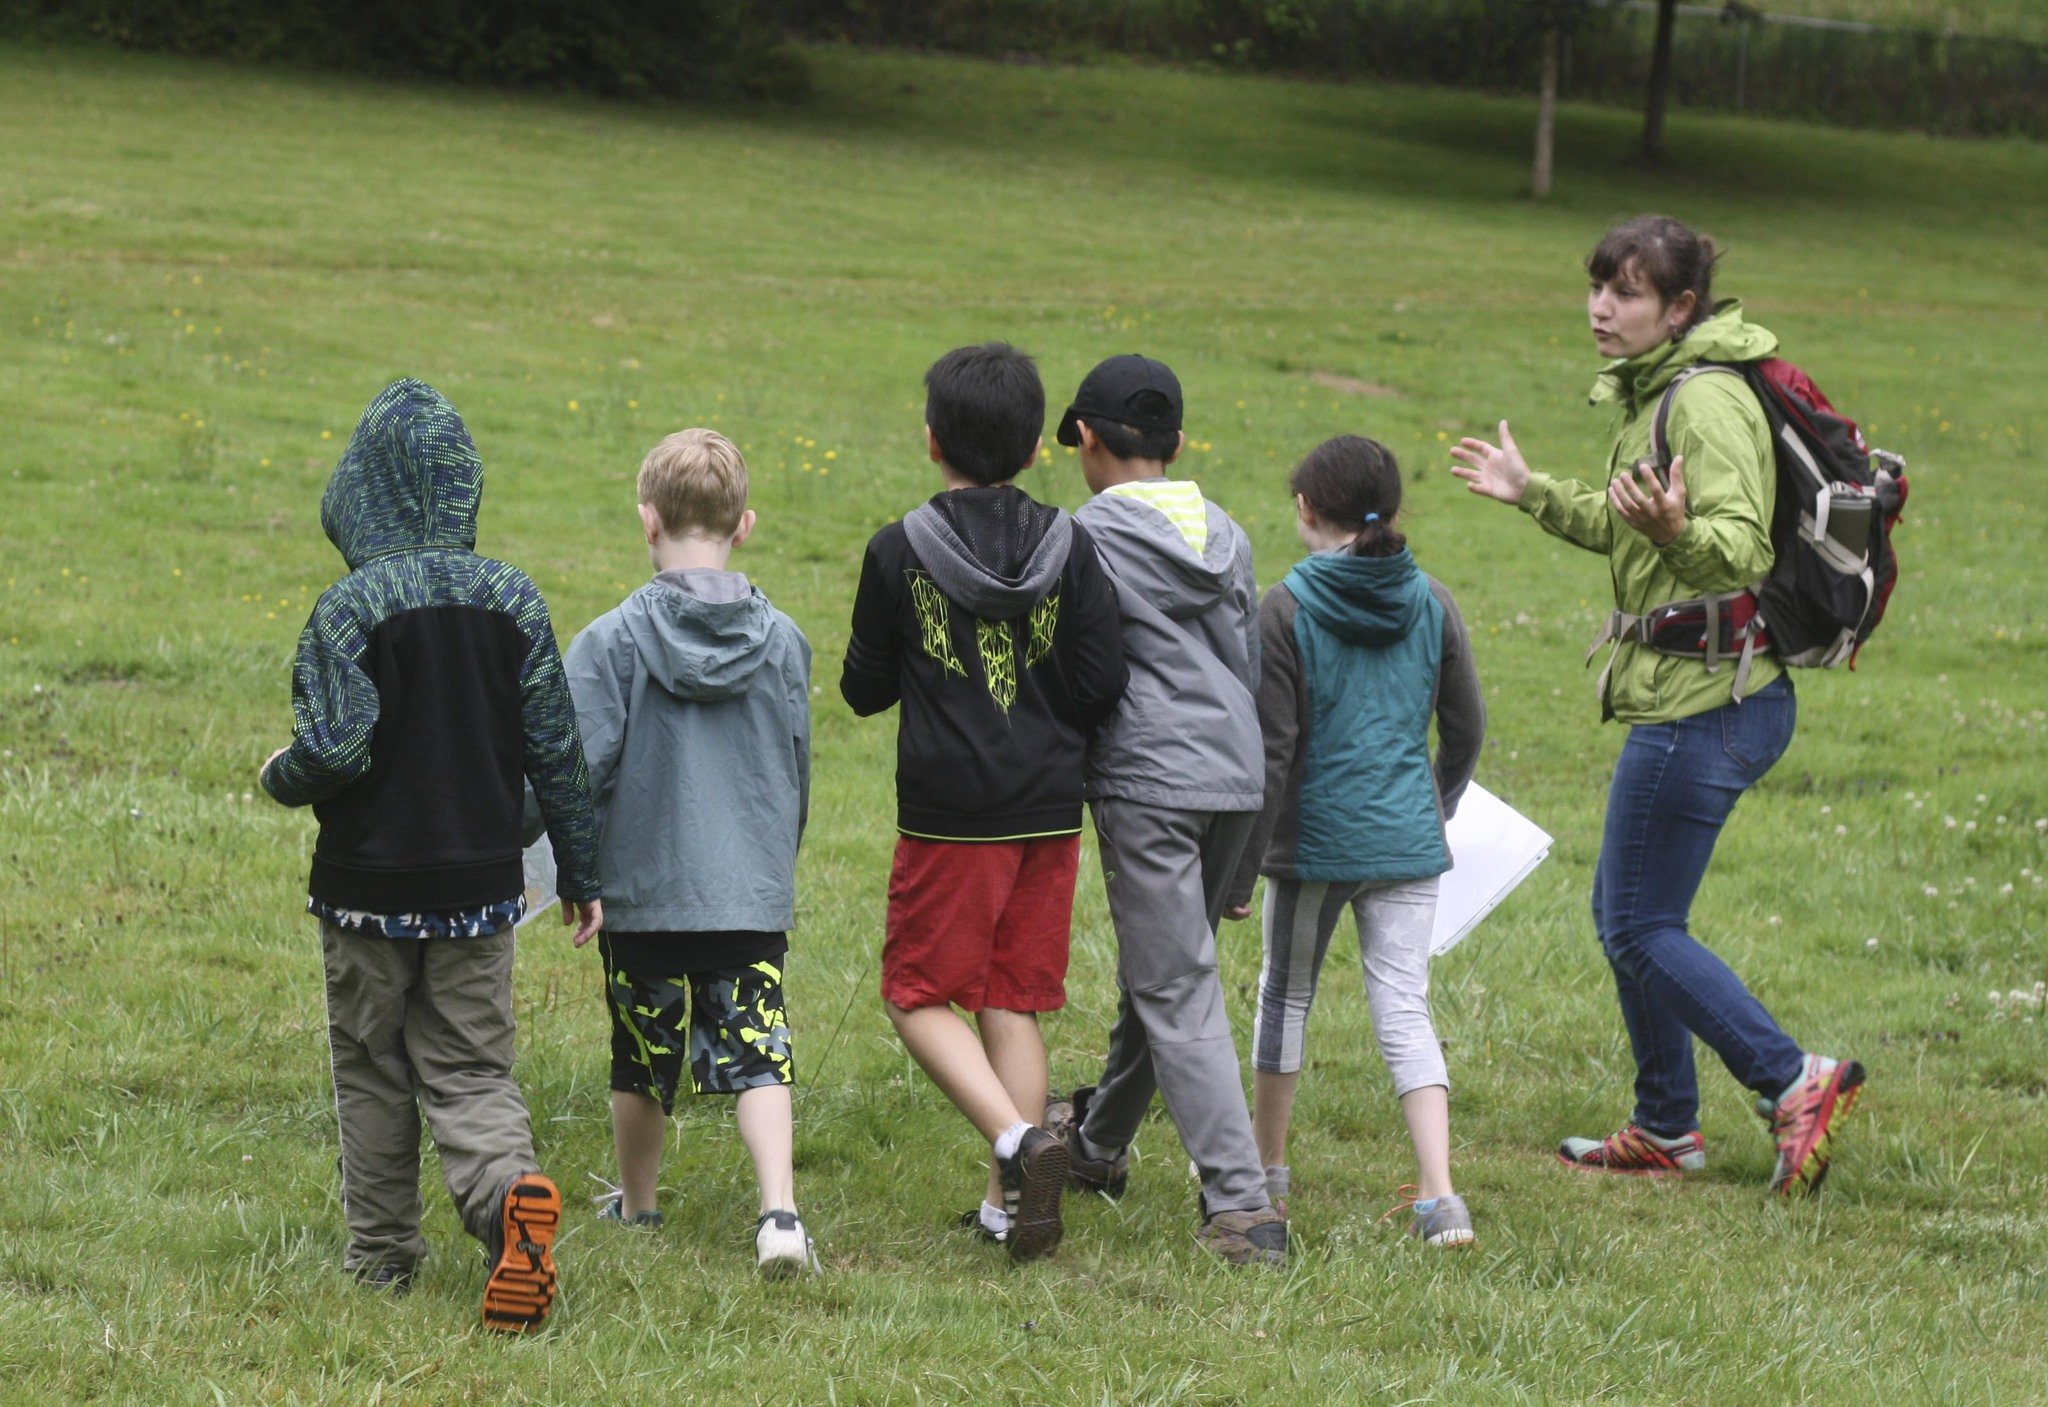 Leader Becky Pittman keeps track of her campers at Farrel-McWhirter Park in Redmond during a Nature Vision Outdoor Skills Camp in July. The kids focused on compass and mapping work.